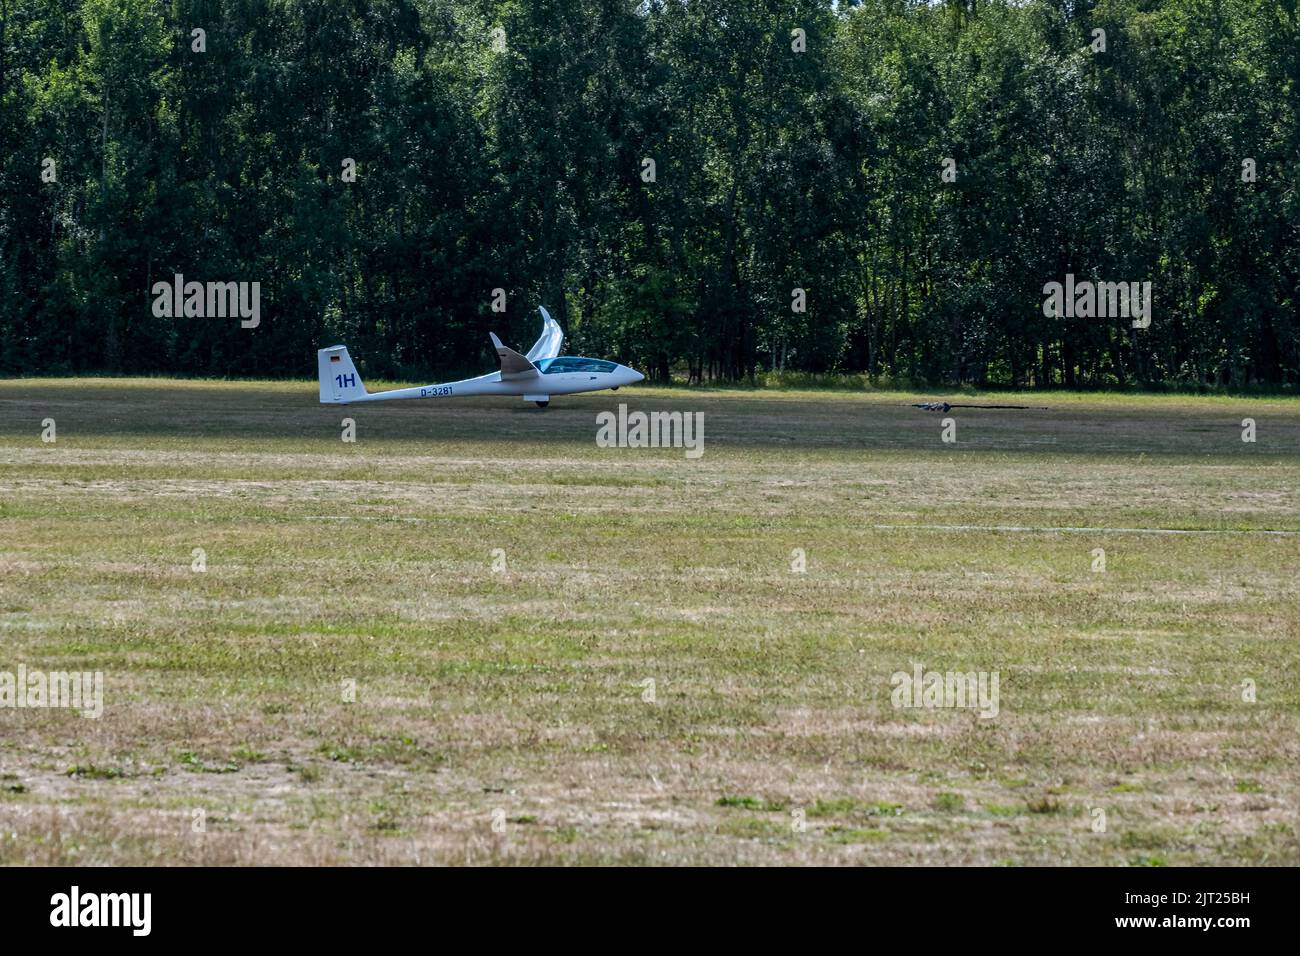 Hamburg, Germany - 08 21 2022: a glider pilot is pulled by a rope for take-off Stock Photo